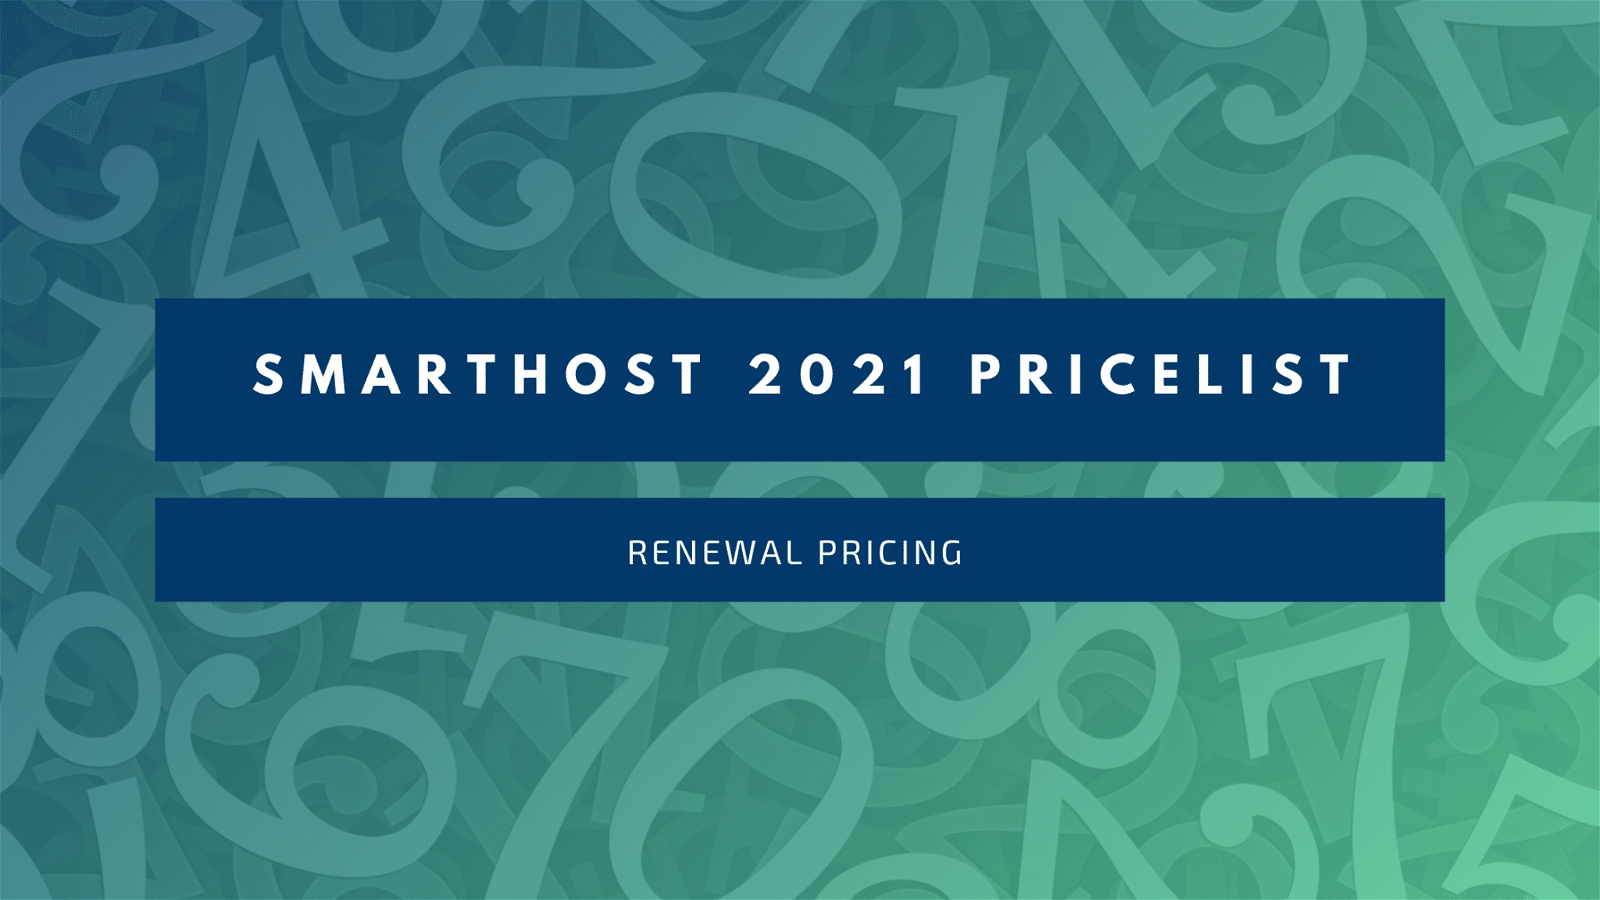 The image is showing the renewal pricing for the SMARTHOST 2021 pricelist.